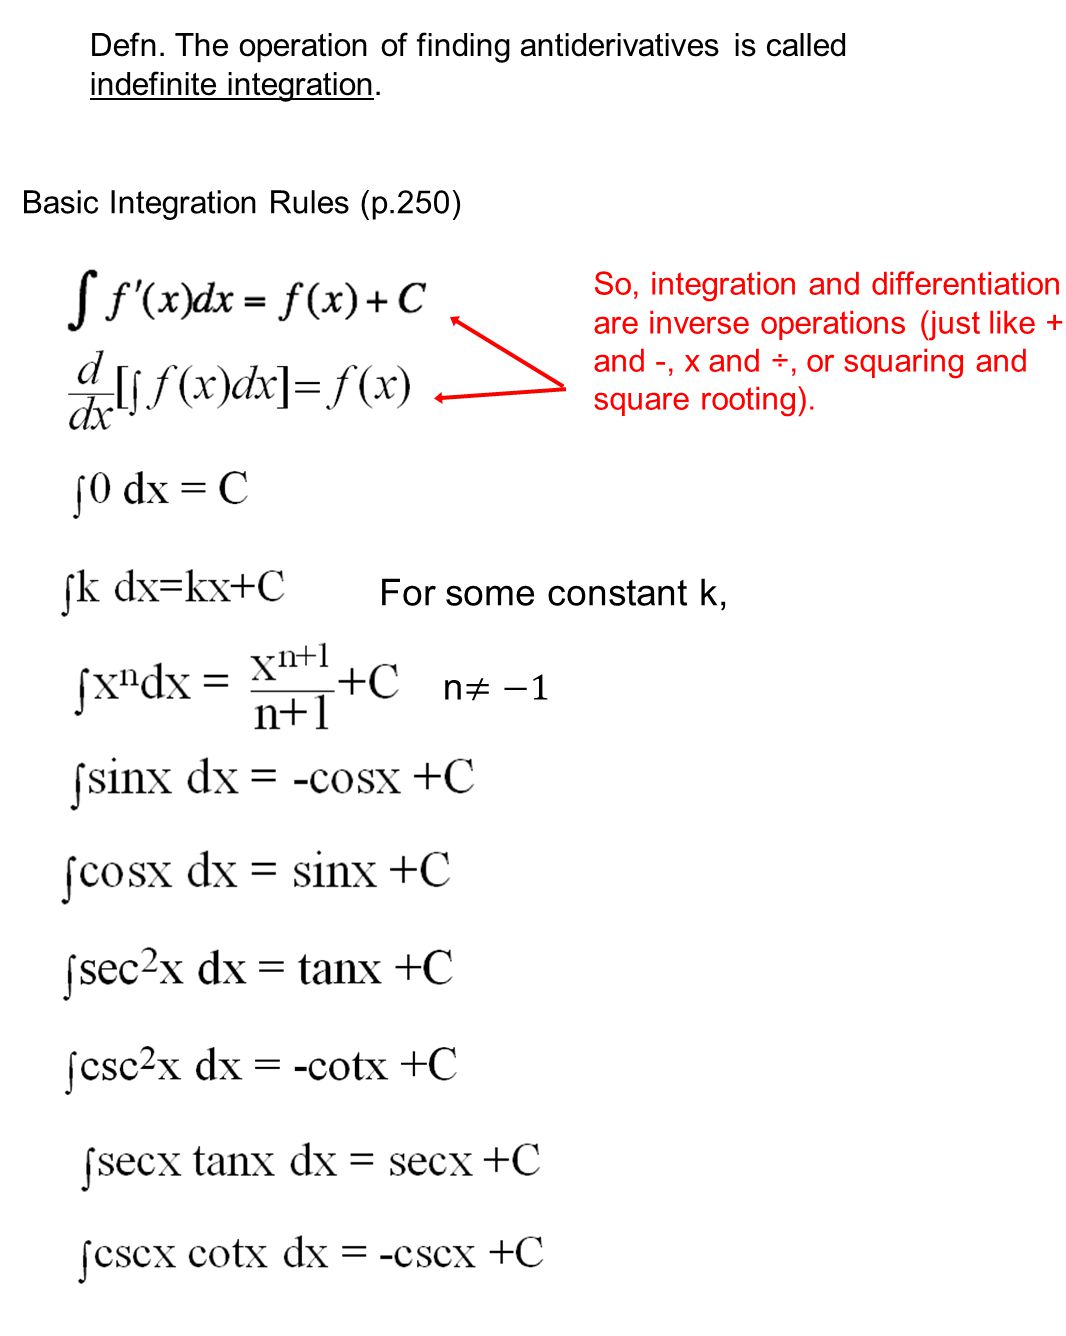 Defn. The operation of finding antiderivatives is called indefinite integration.